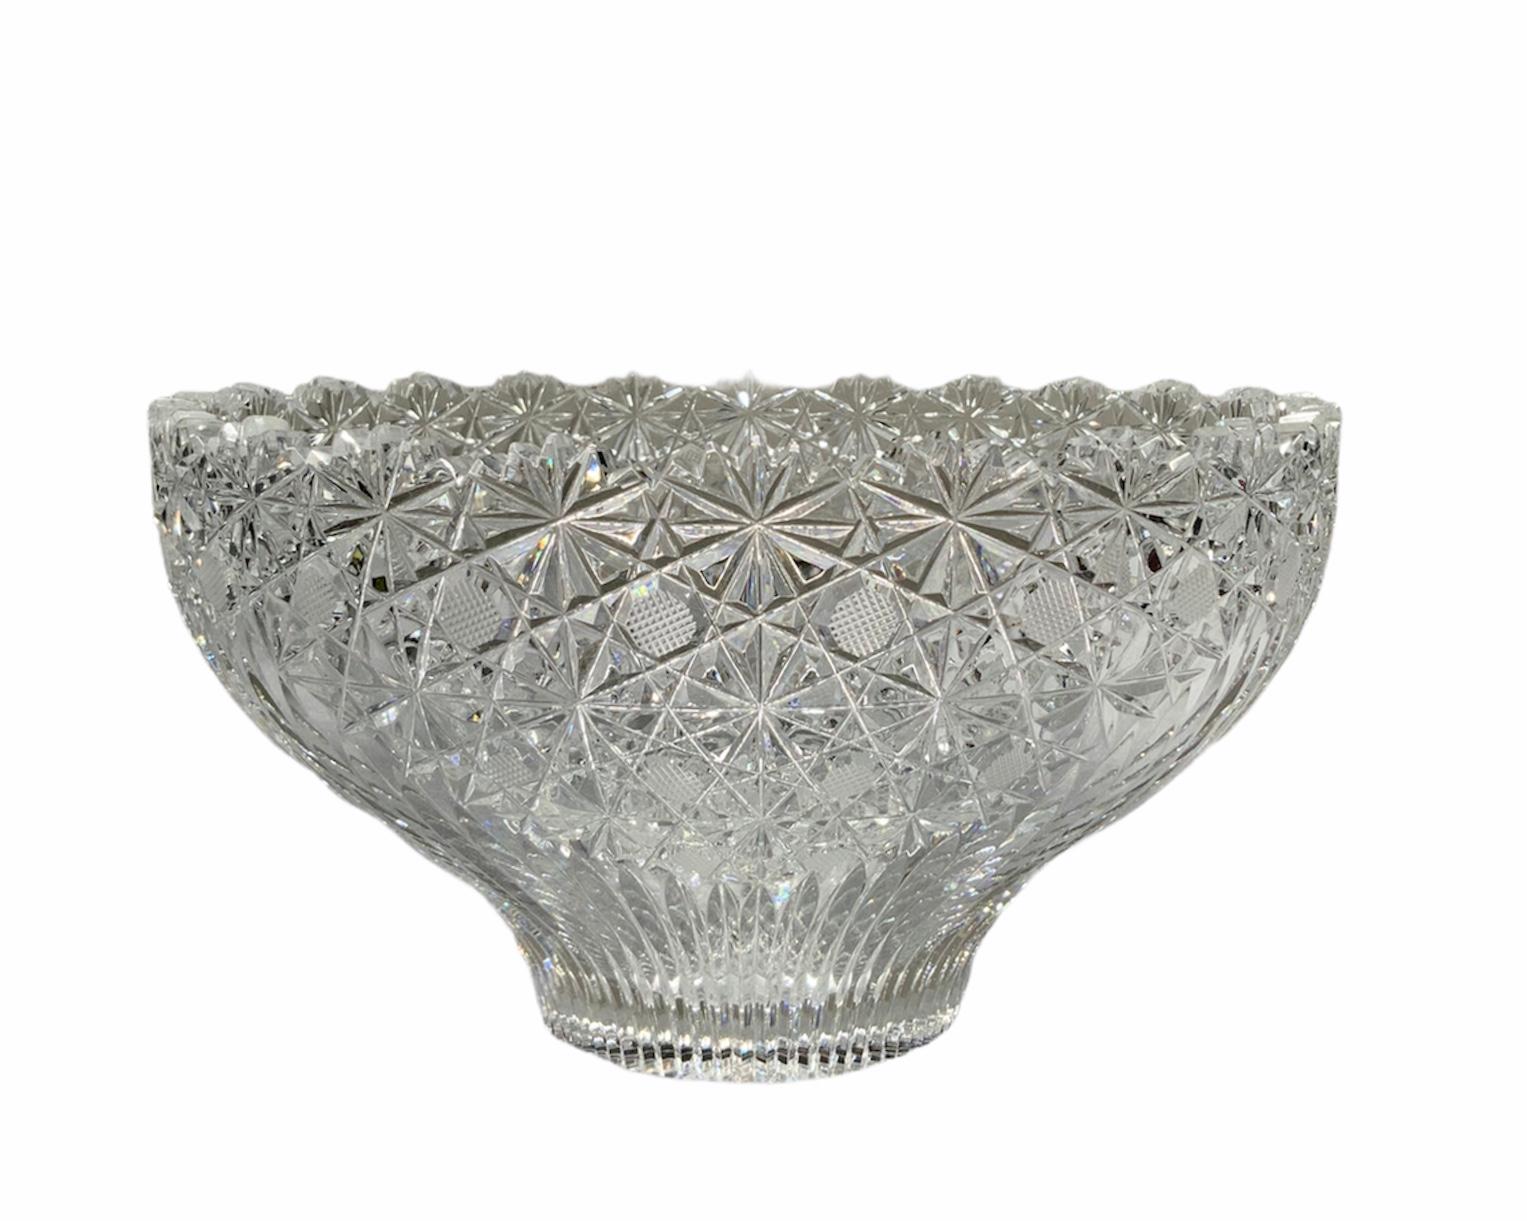 This is an American Brilliant cut glass crystal bowl adorned with stars and hobstars formed by geometric triangles. Strawberry diamonds are in the center of the hobstars. The rim is scalloped. Inside the bowl, there is a large trefoil made with